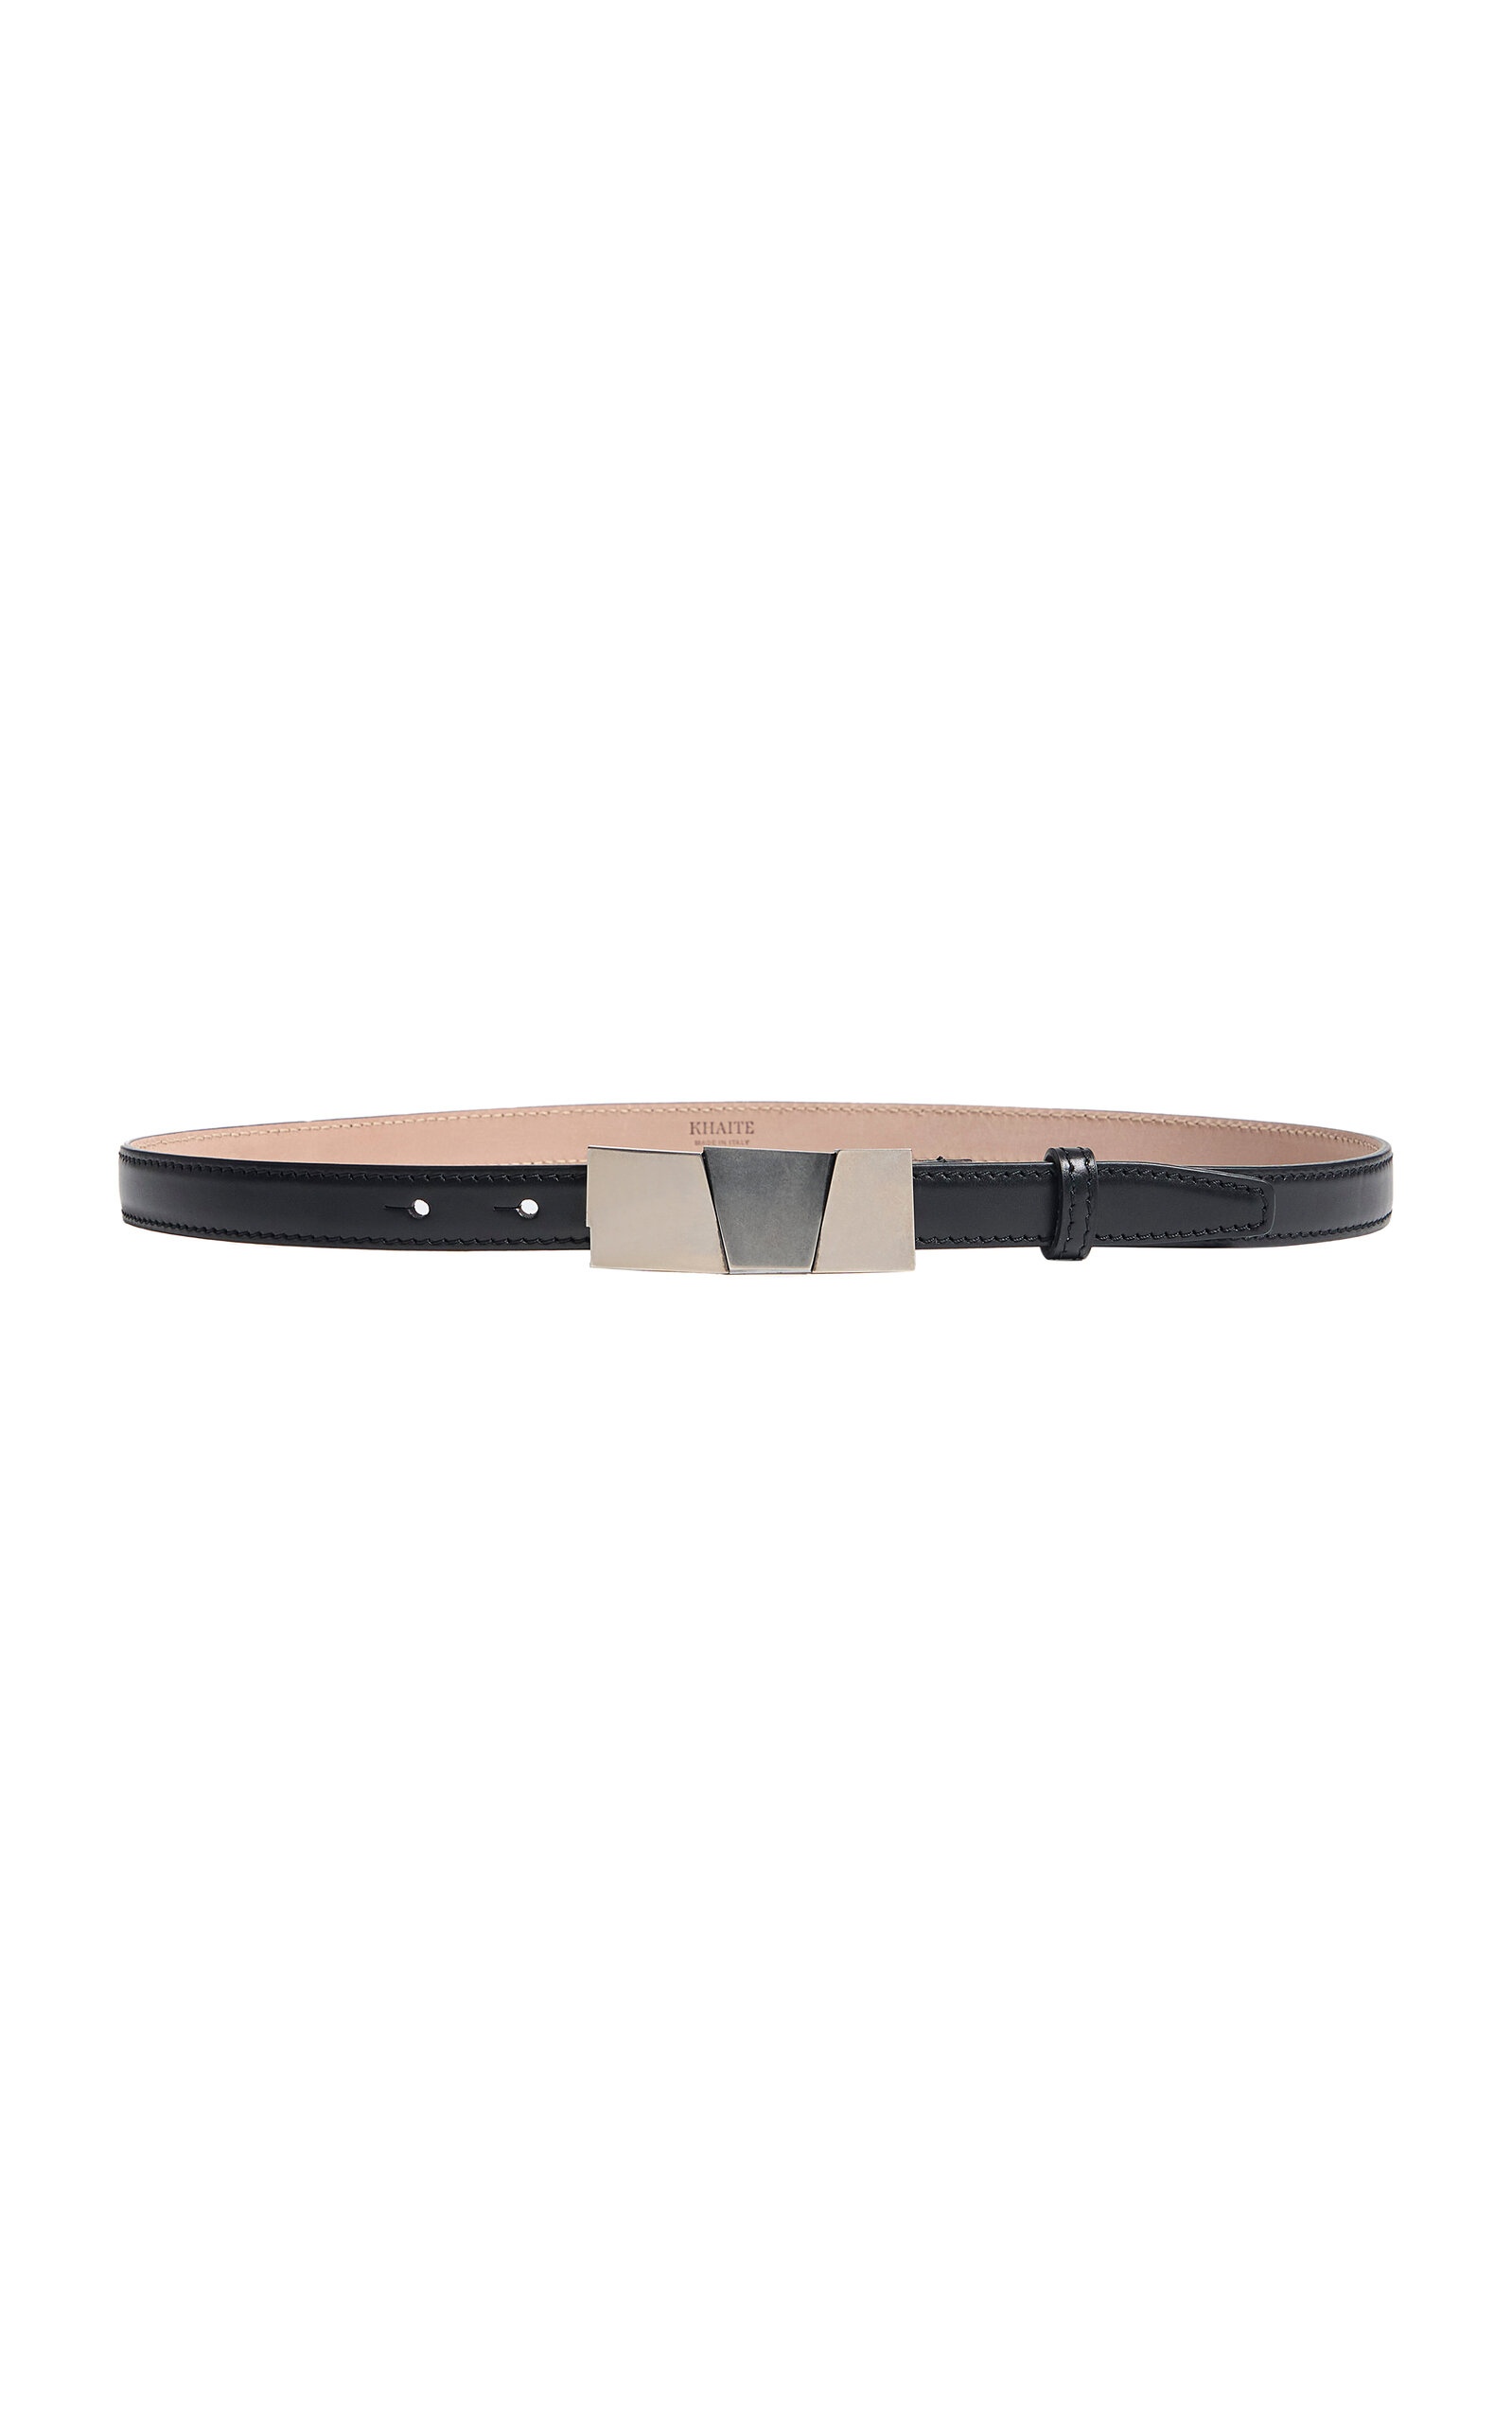 Axel Antique Silver Leather Belt silver - 1